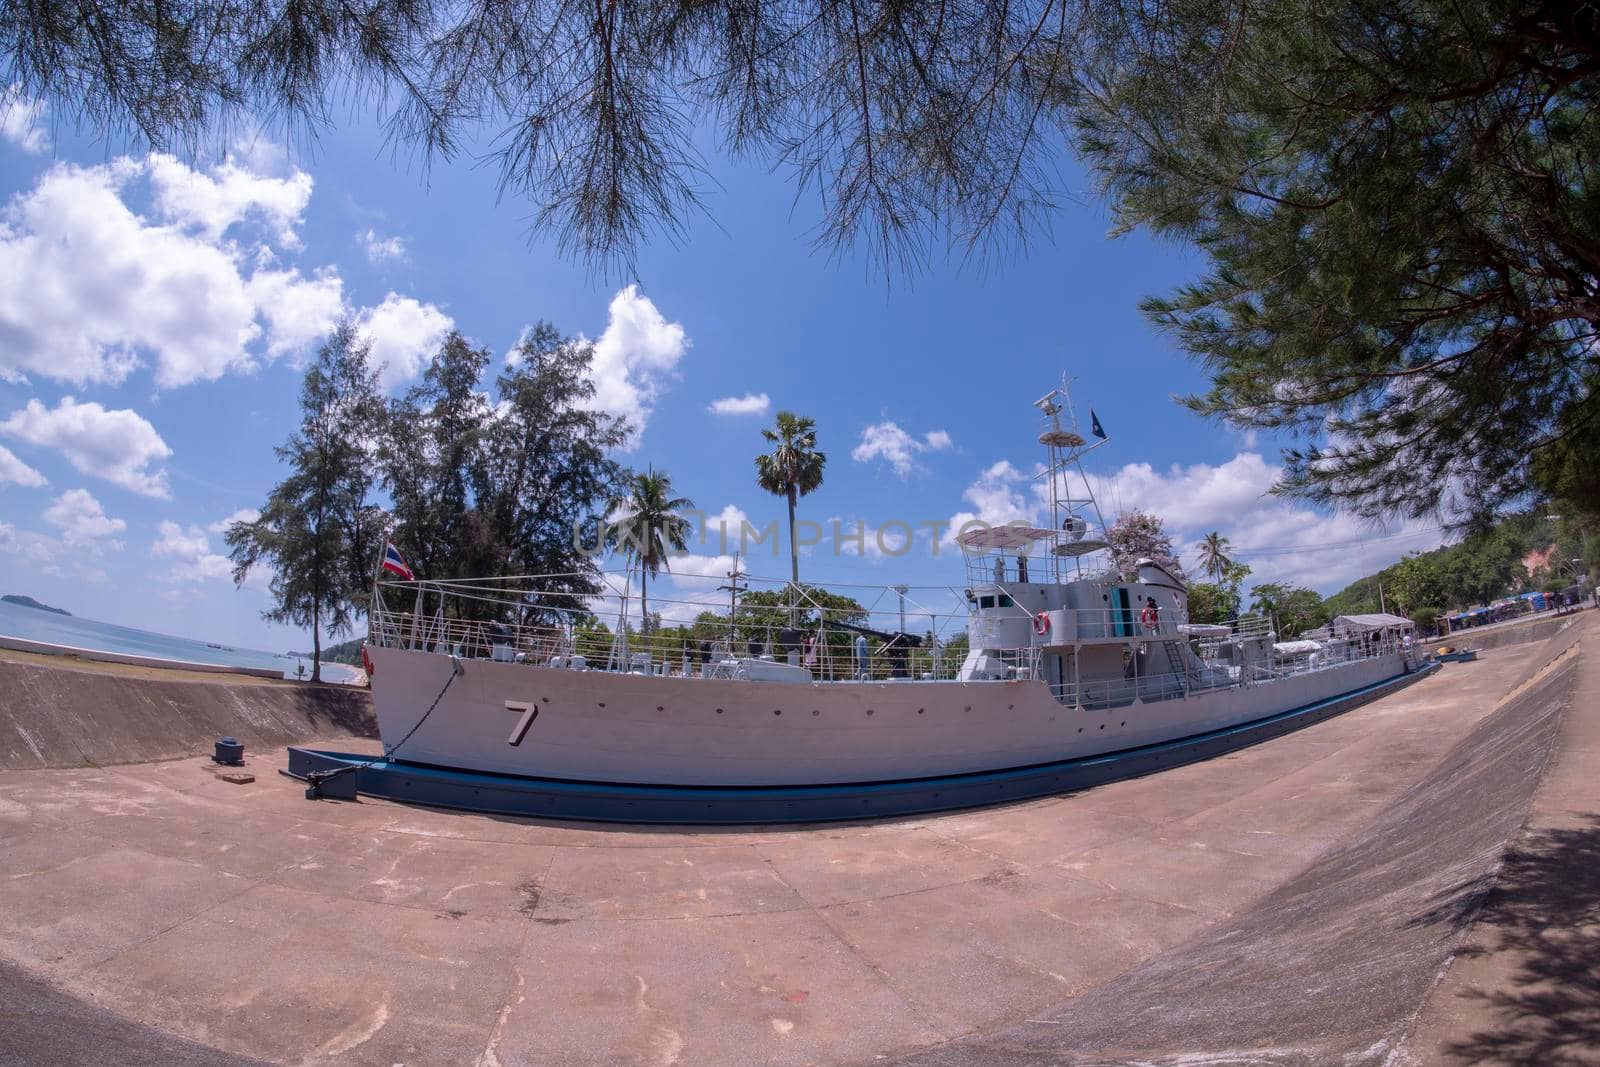 Royal Chumphon Boat Tourist attractions in Chumphon Province